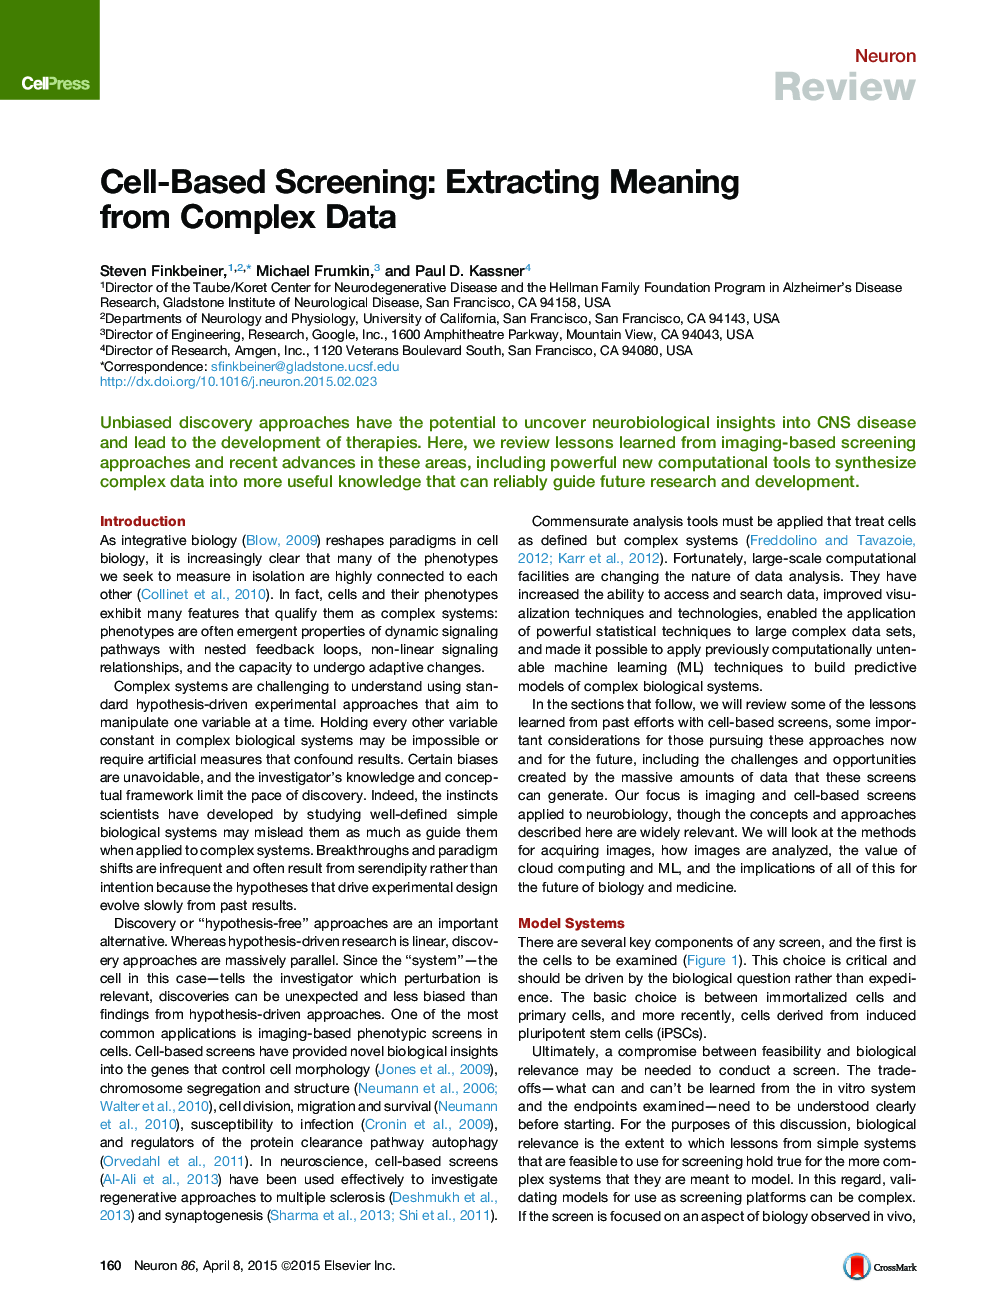 Cell-Based Screening: Extracting Meaning from Complex Data